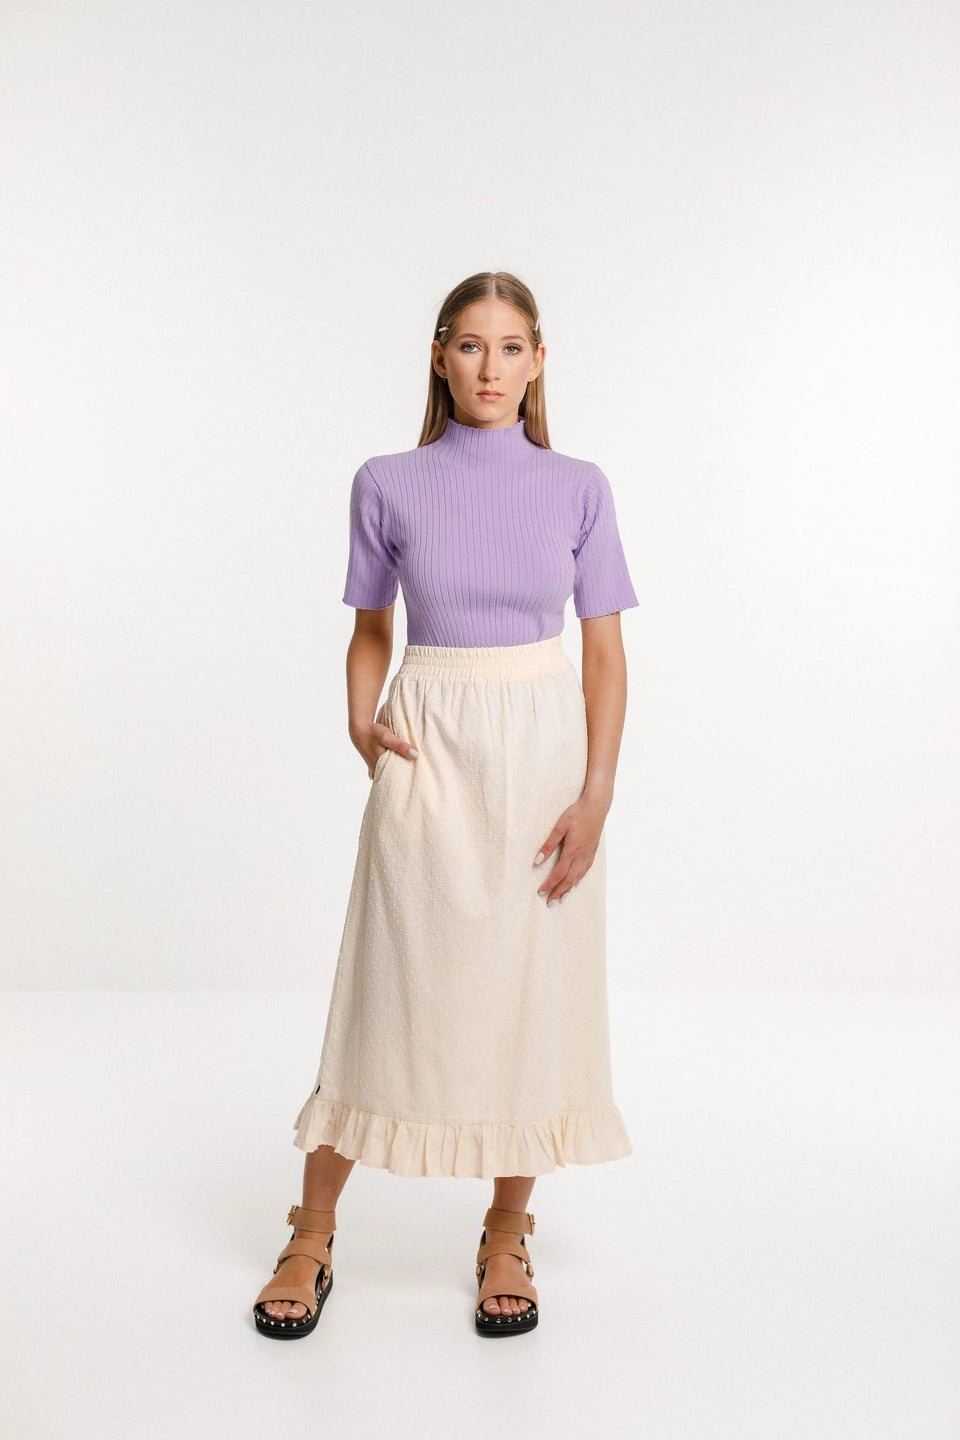 Thing Thing Belle Skirt - French Vanilla